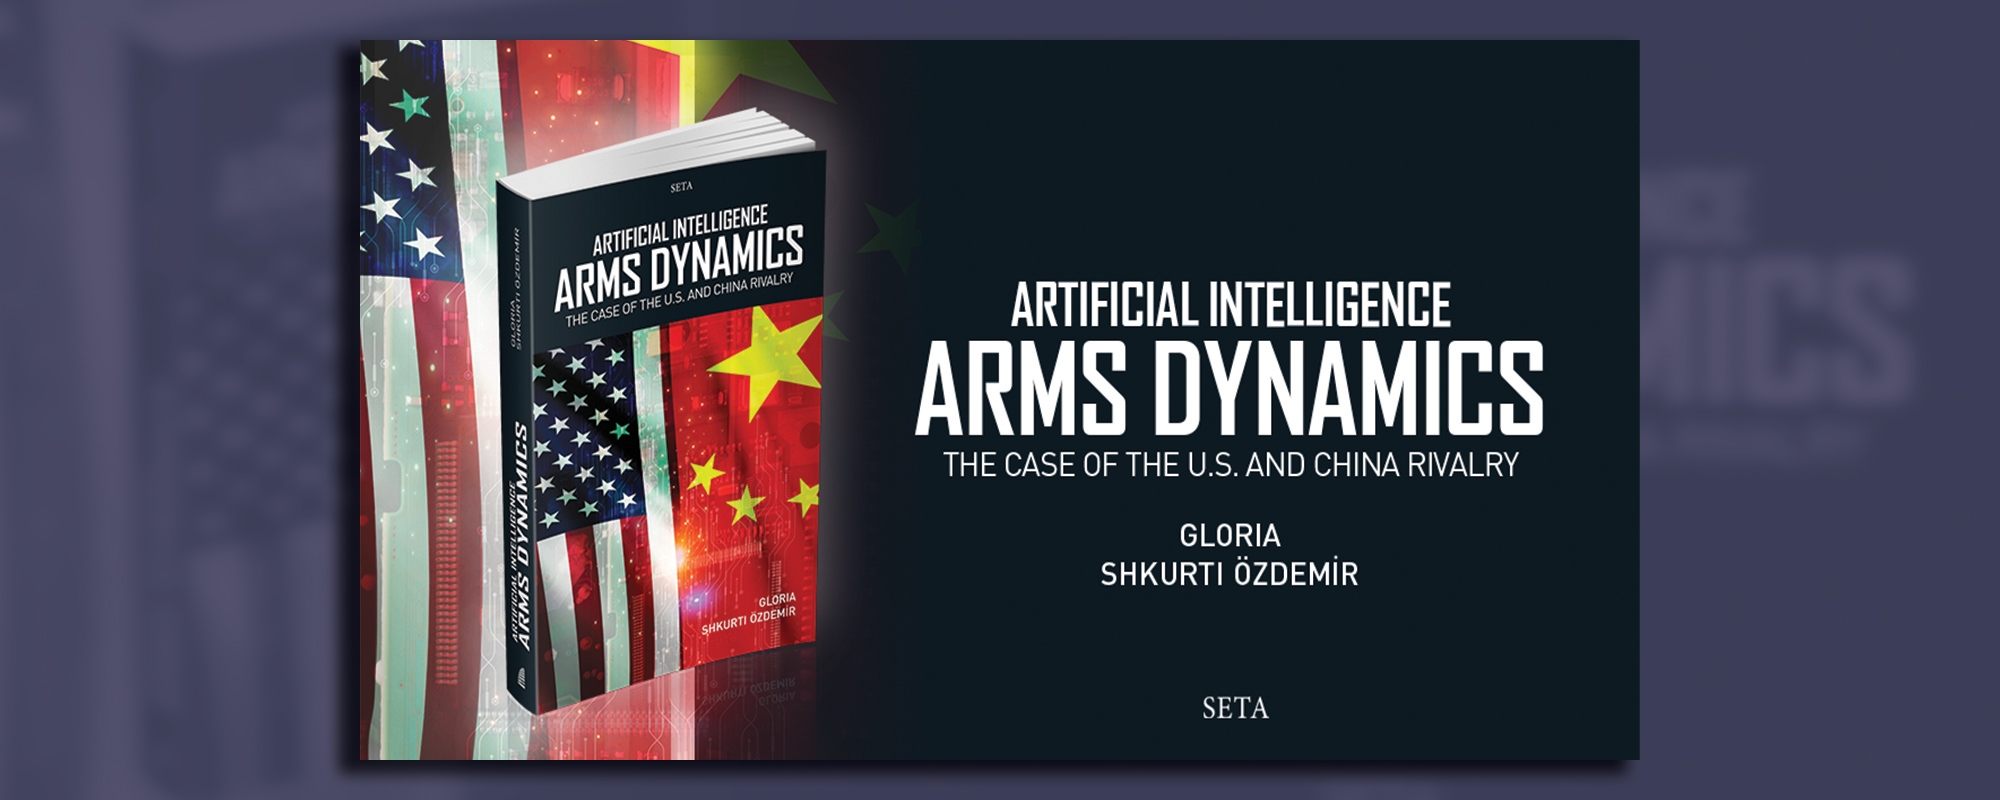 Artificial Intelligence Arms Dynamics The Case of the U S